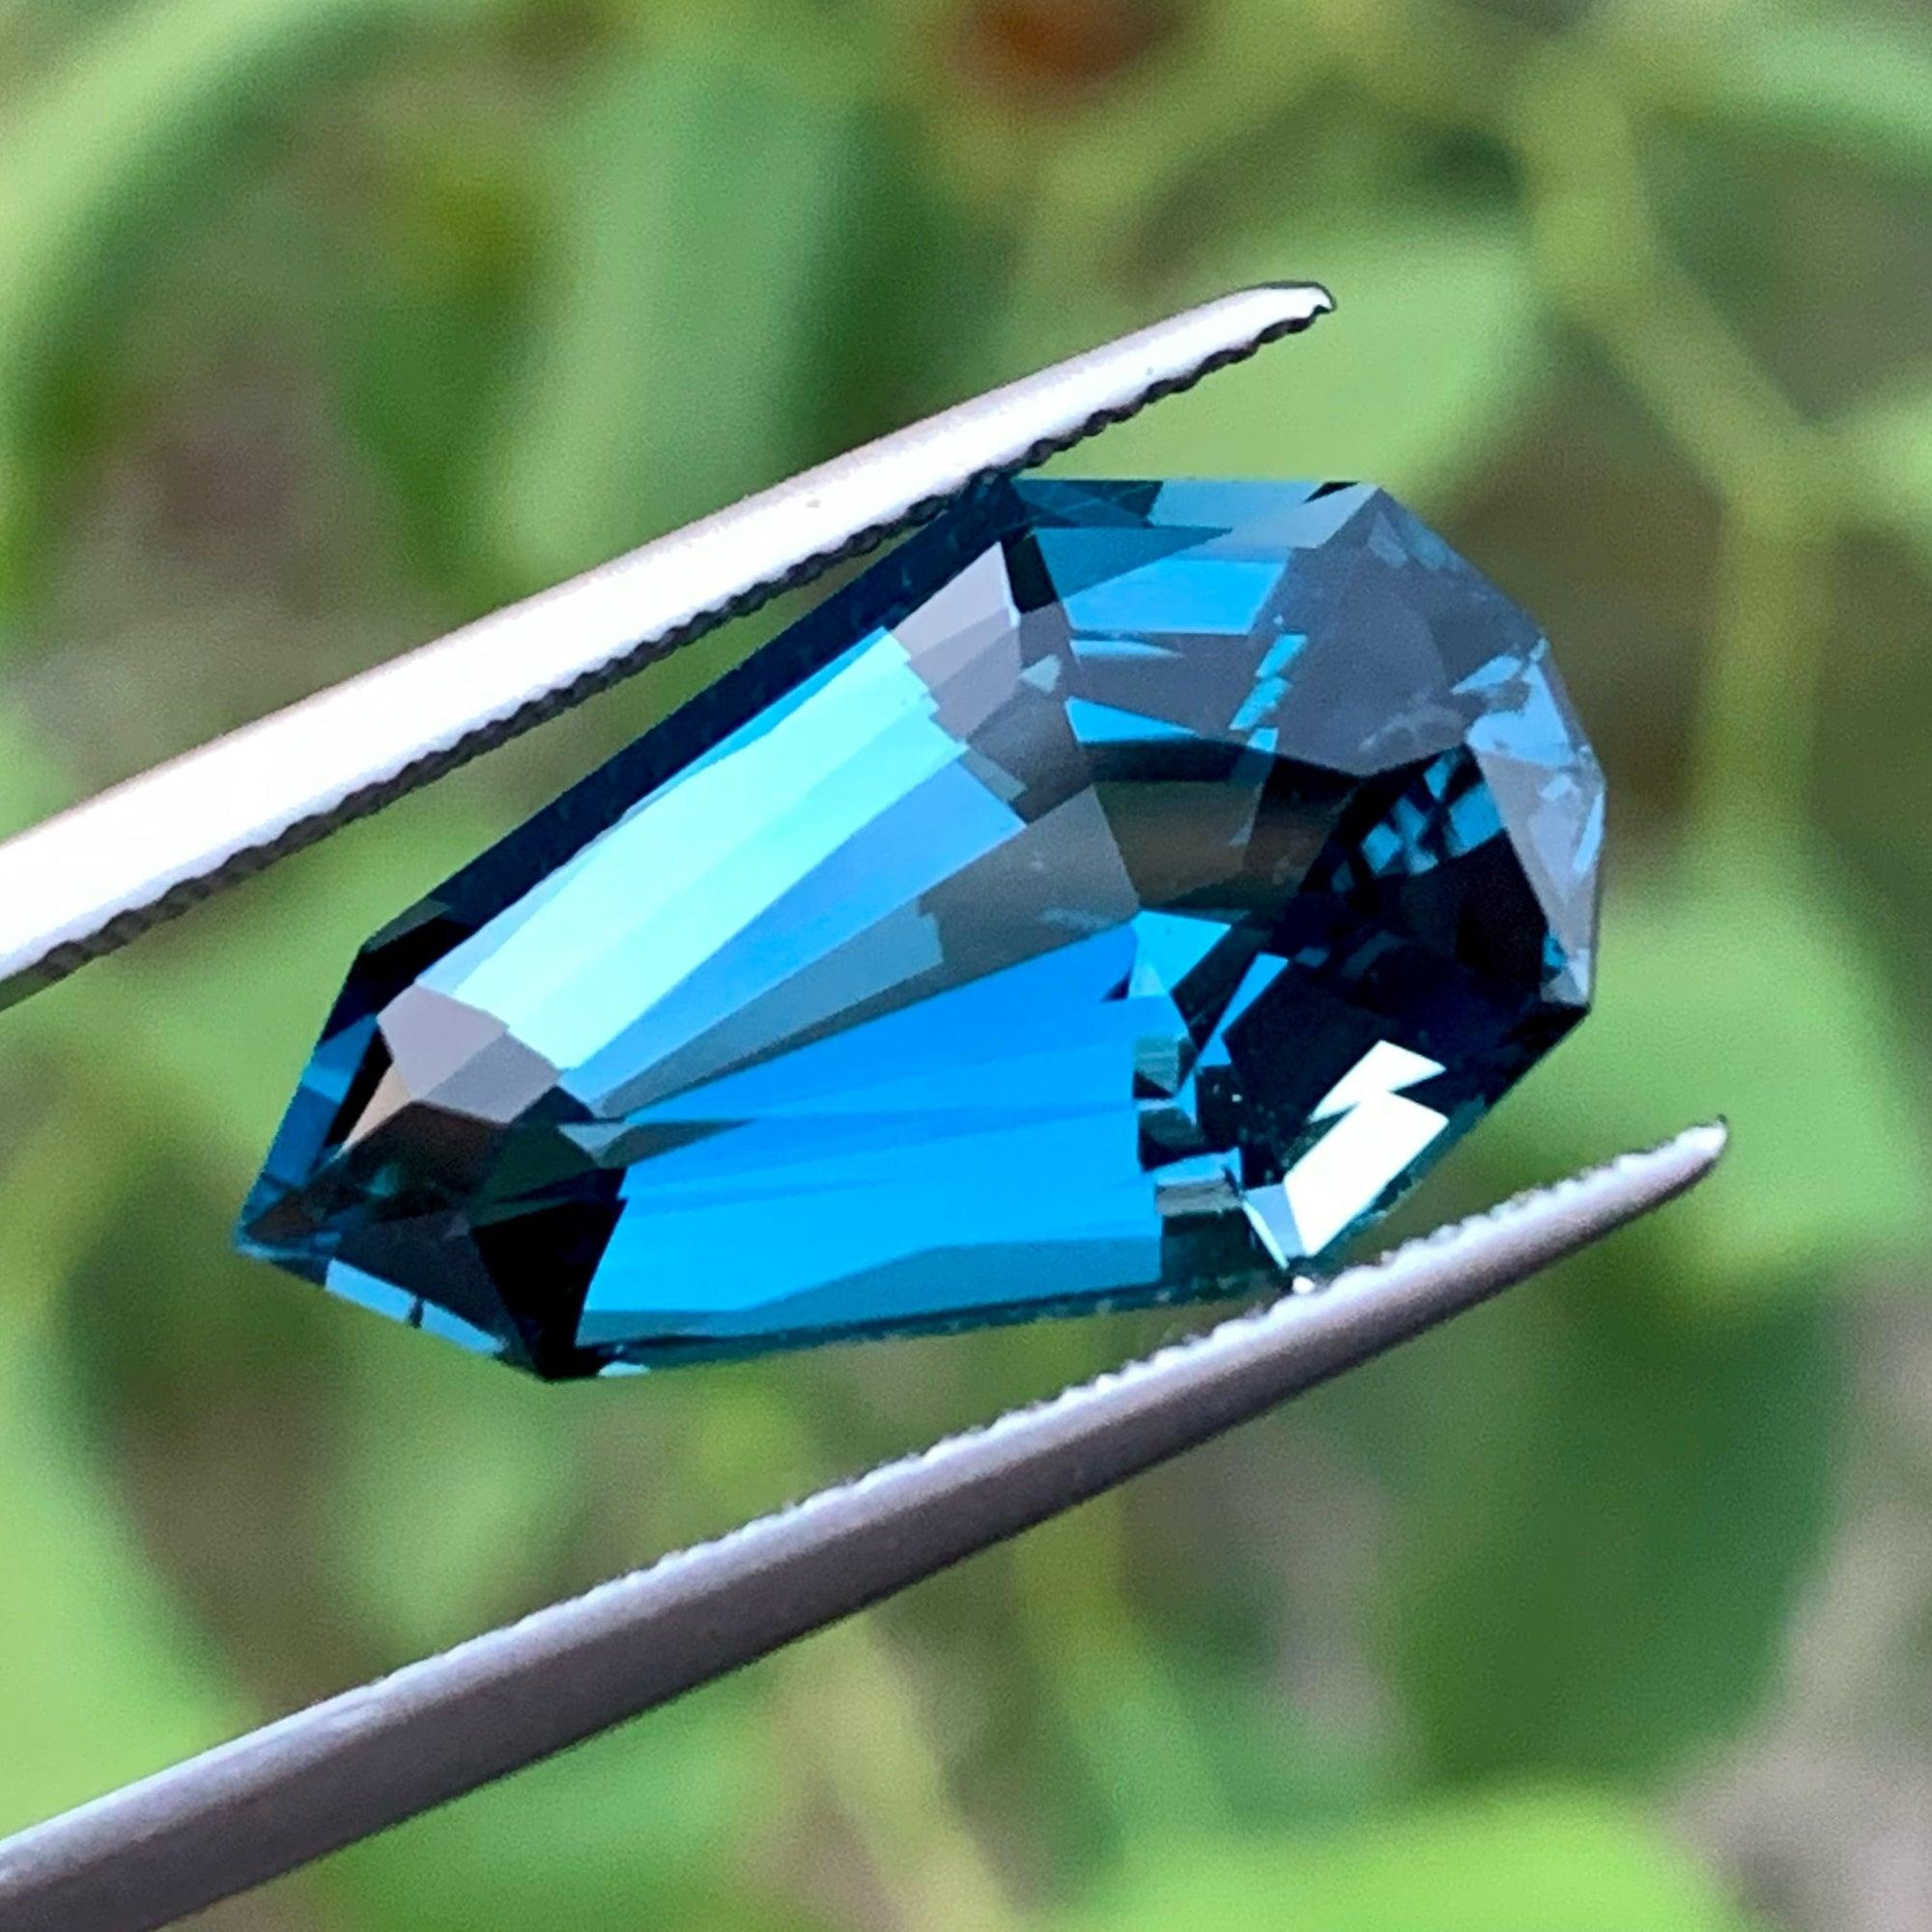 Gorgeous Fancy Cut London Blue Topaz, Available for sale at wholesale price natural high quality 11.21 Carats Loupe Clean Clarity, Natural Loose Topaz from Africa. 
Product Information:
GEMSTONE NAME: Majestic Natural Loose Topaz